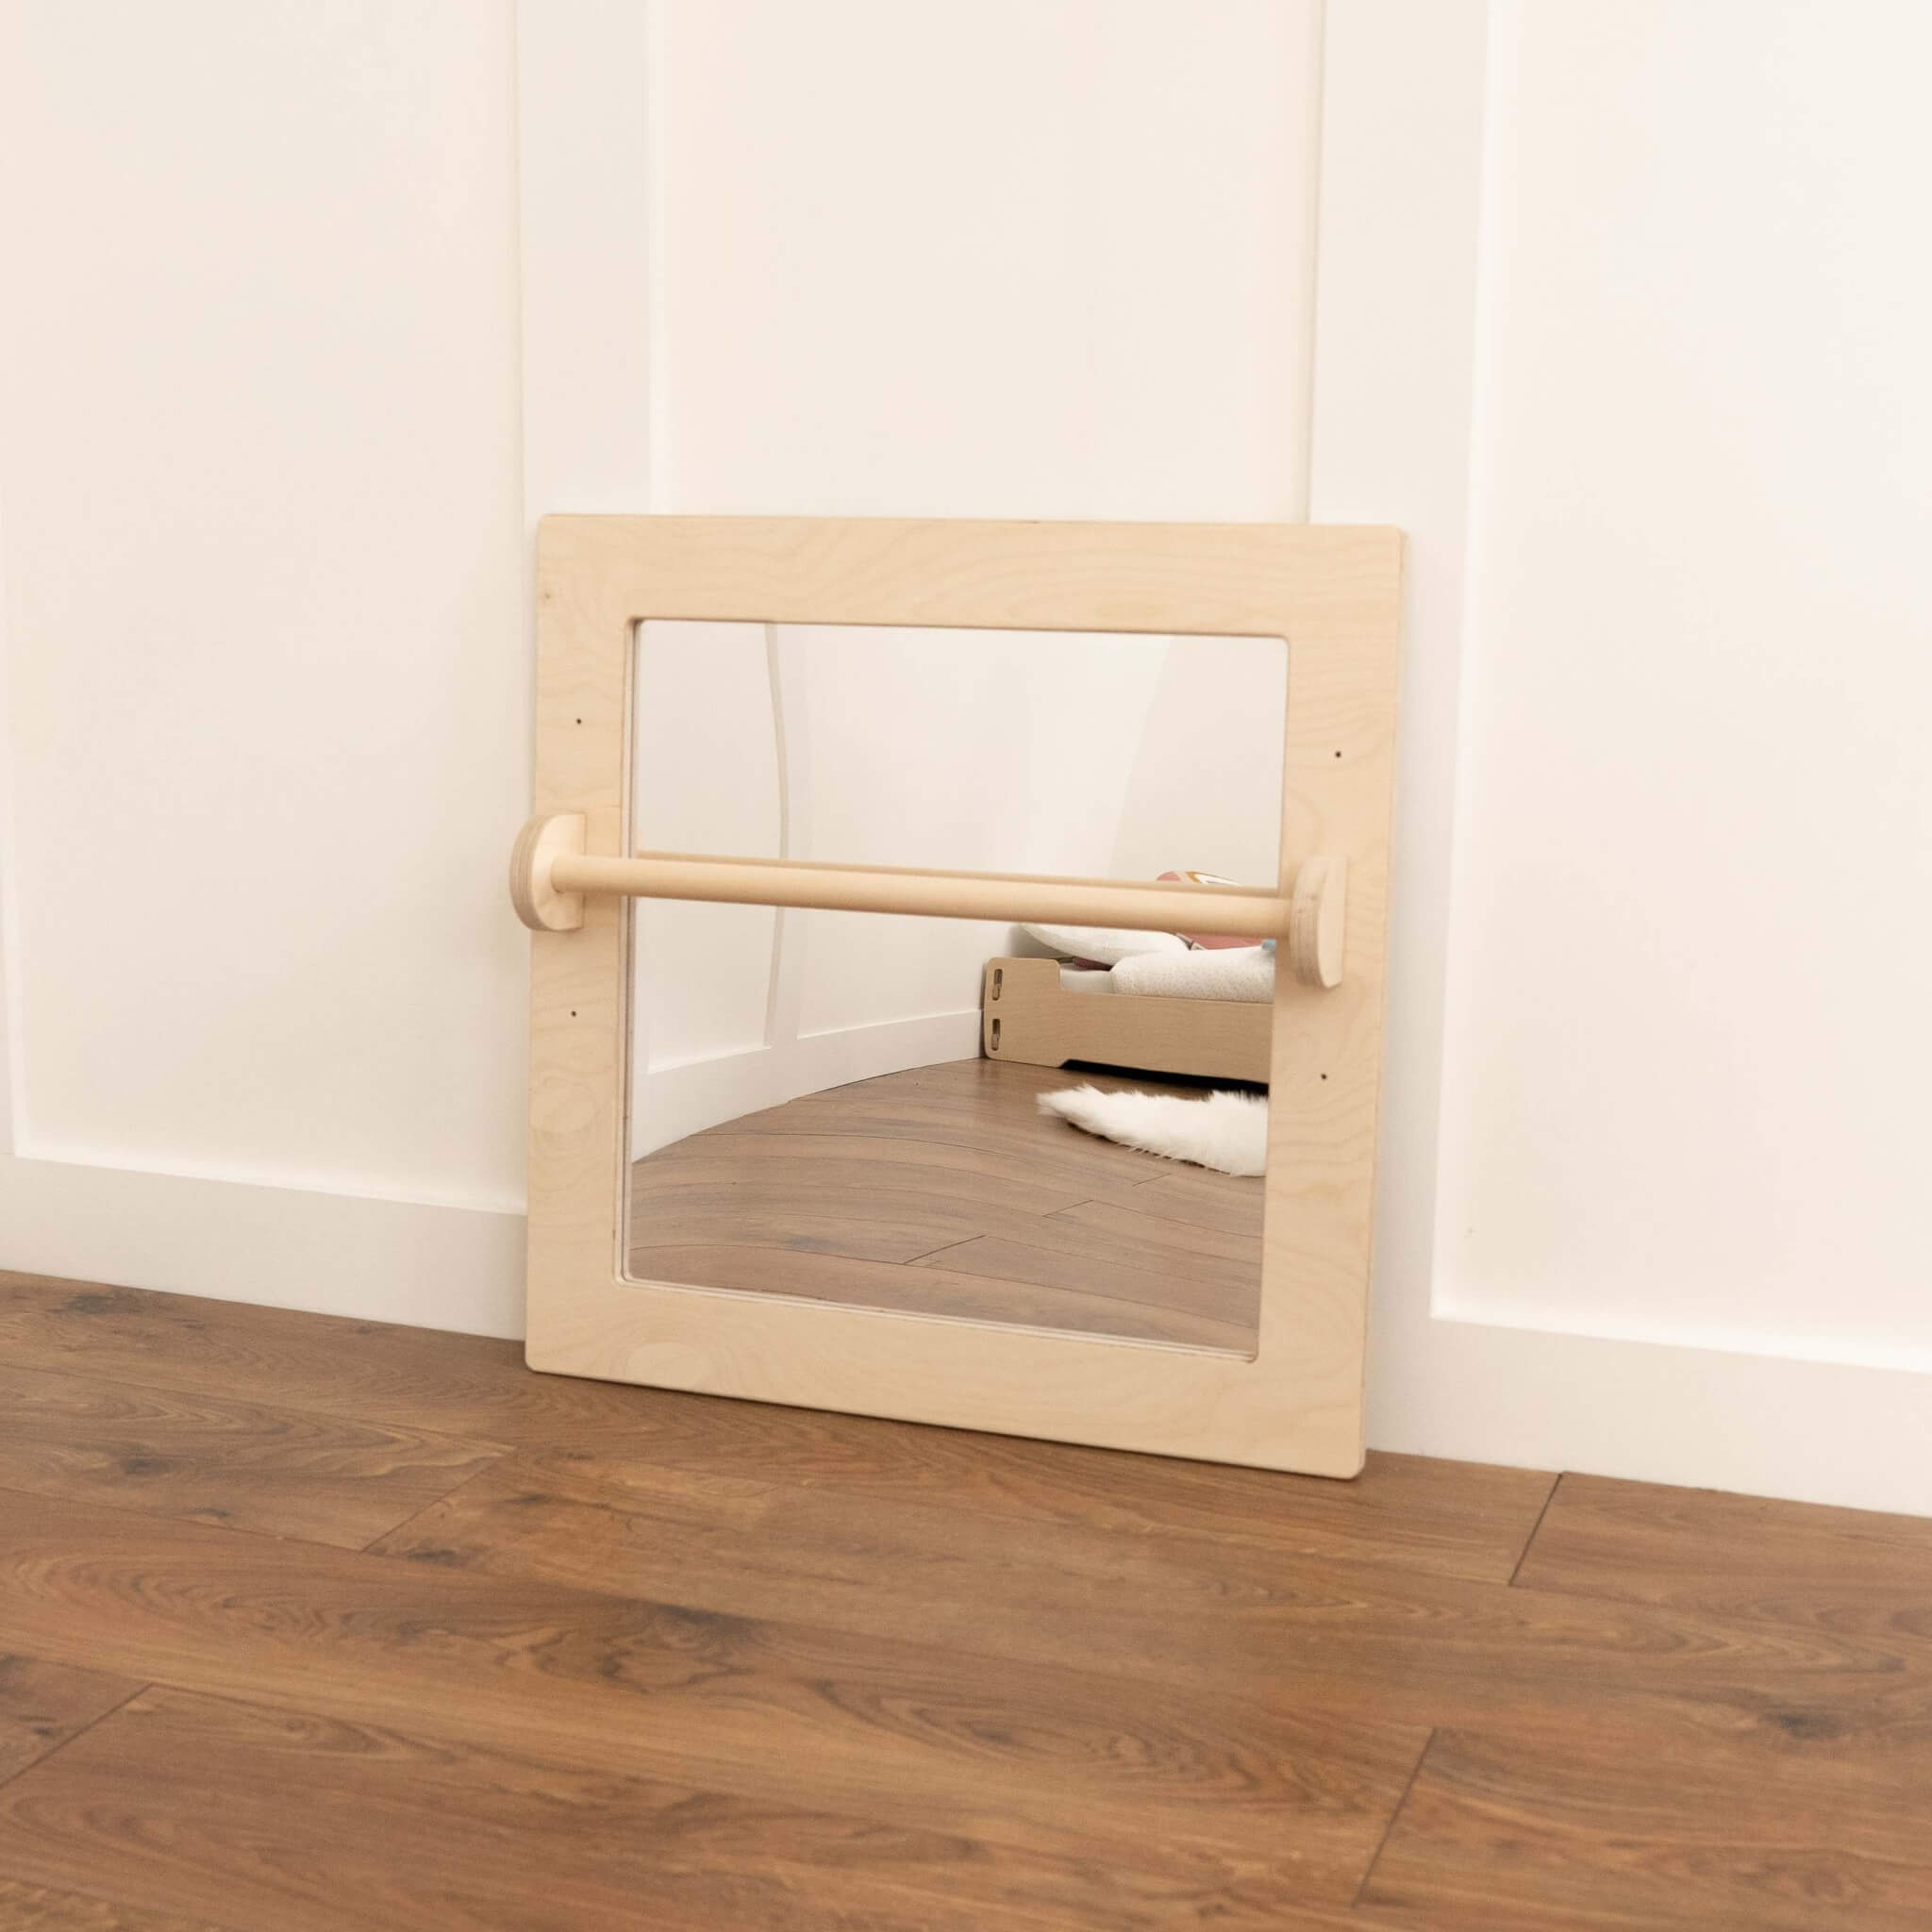 eco baby pull up bar and mirror